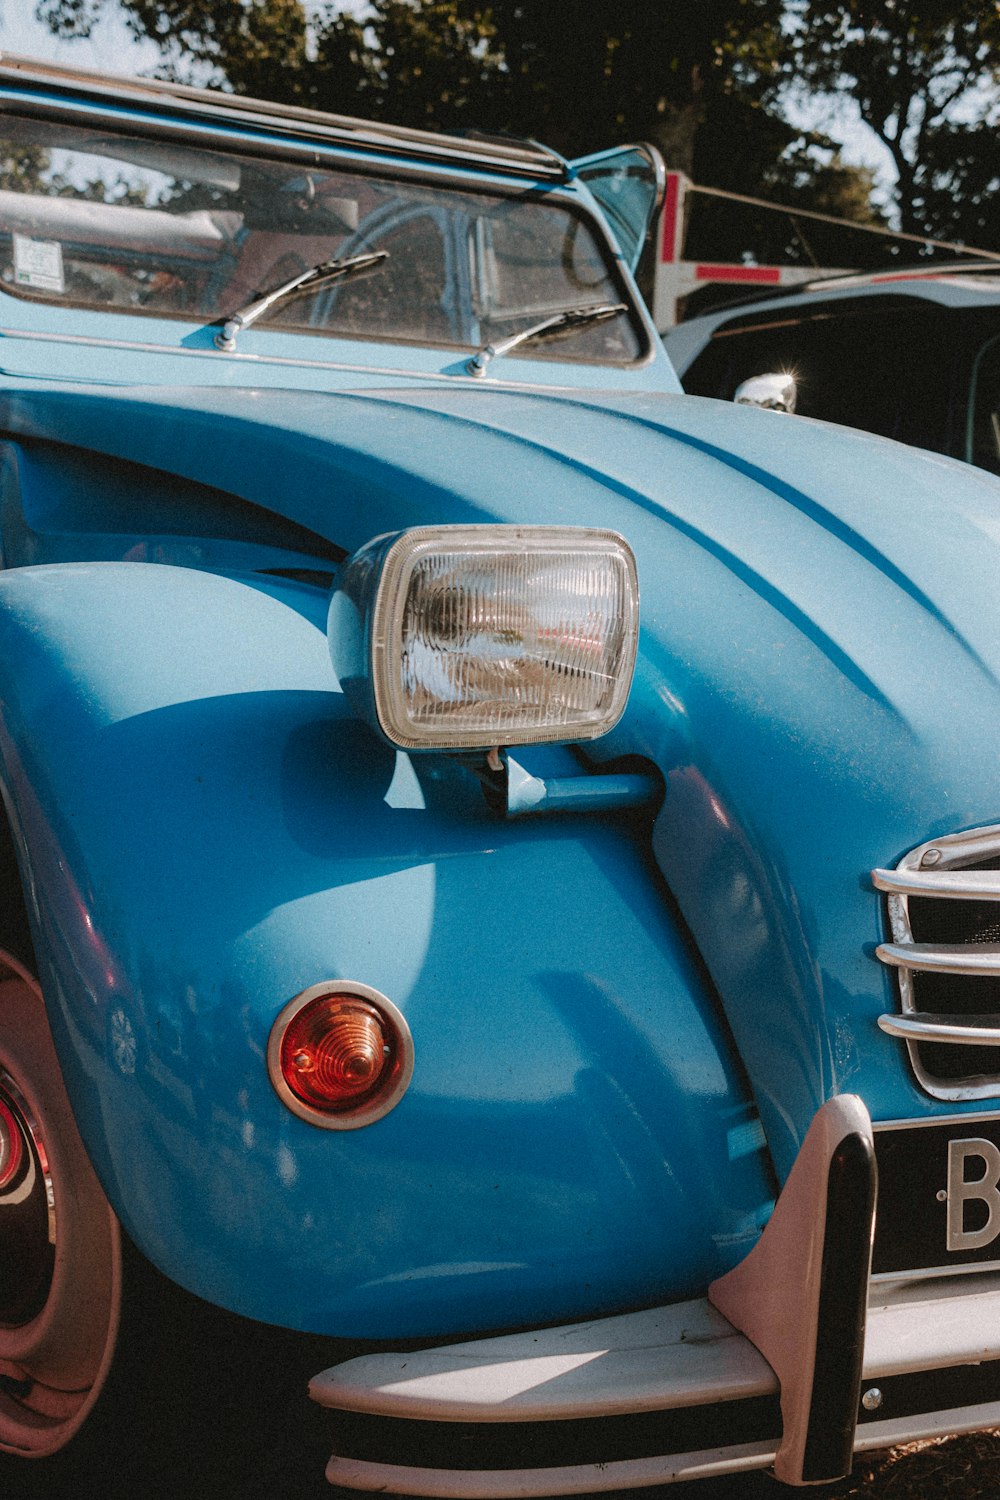 blue and silver vintage car